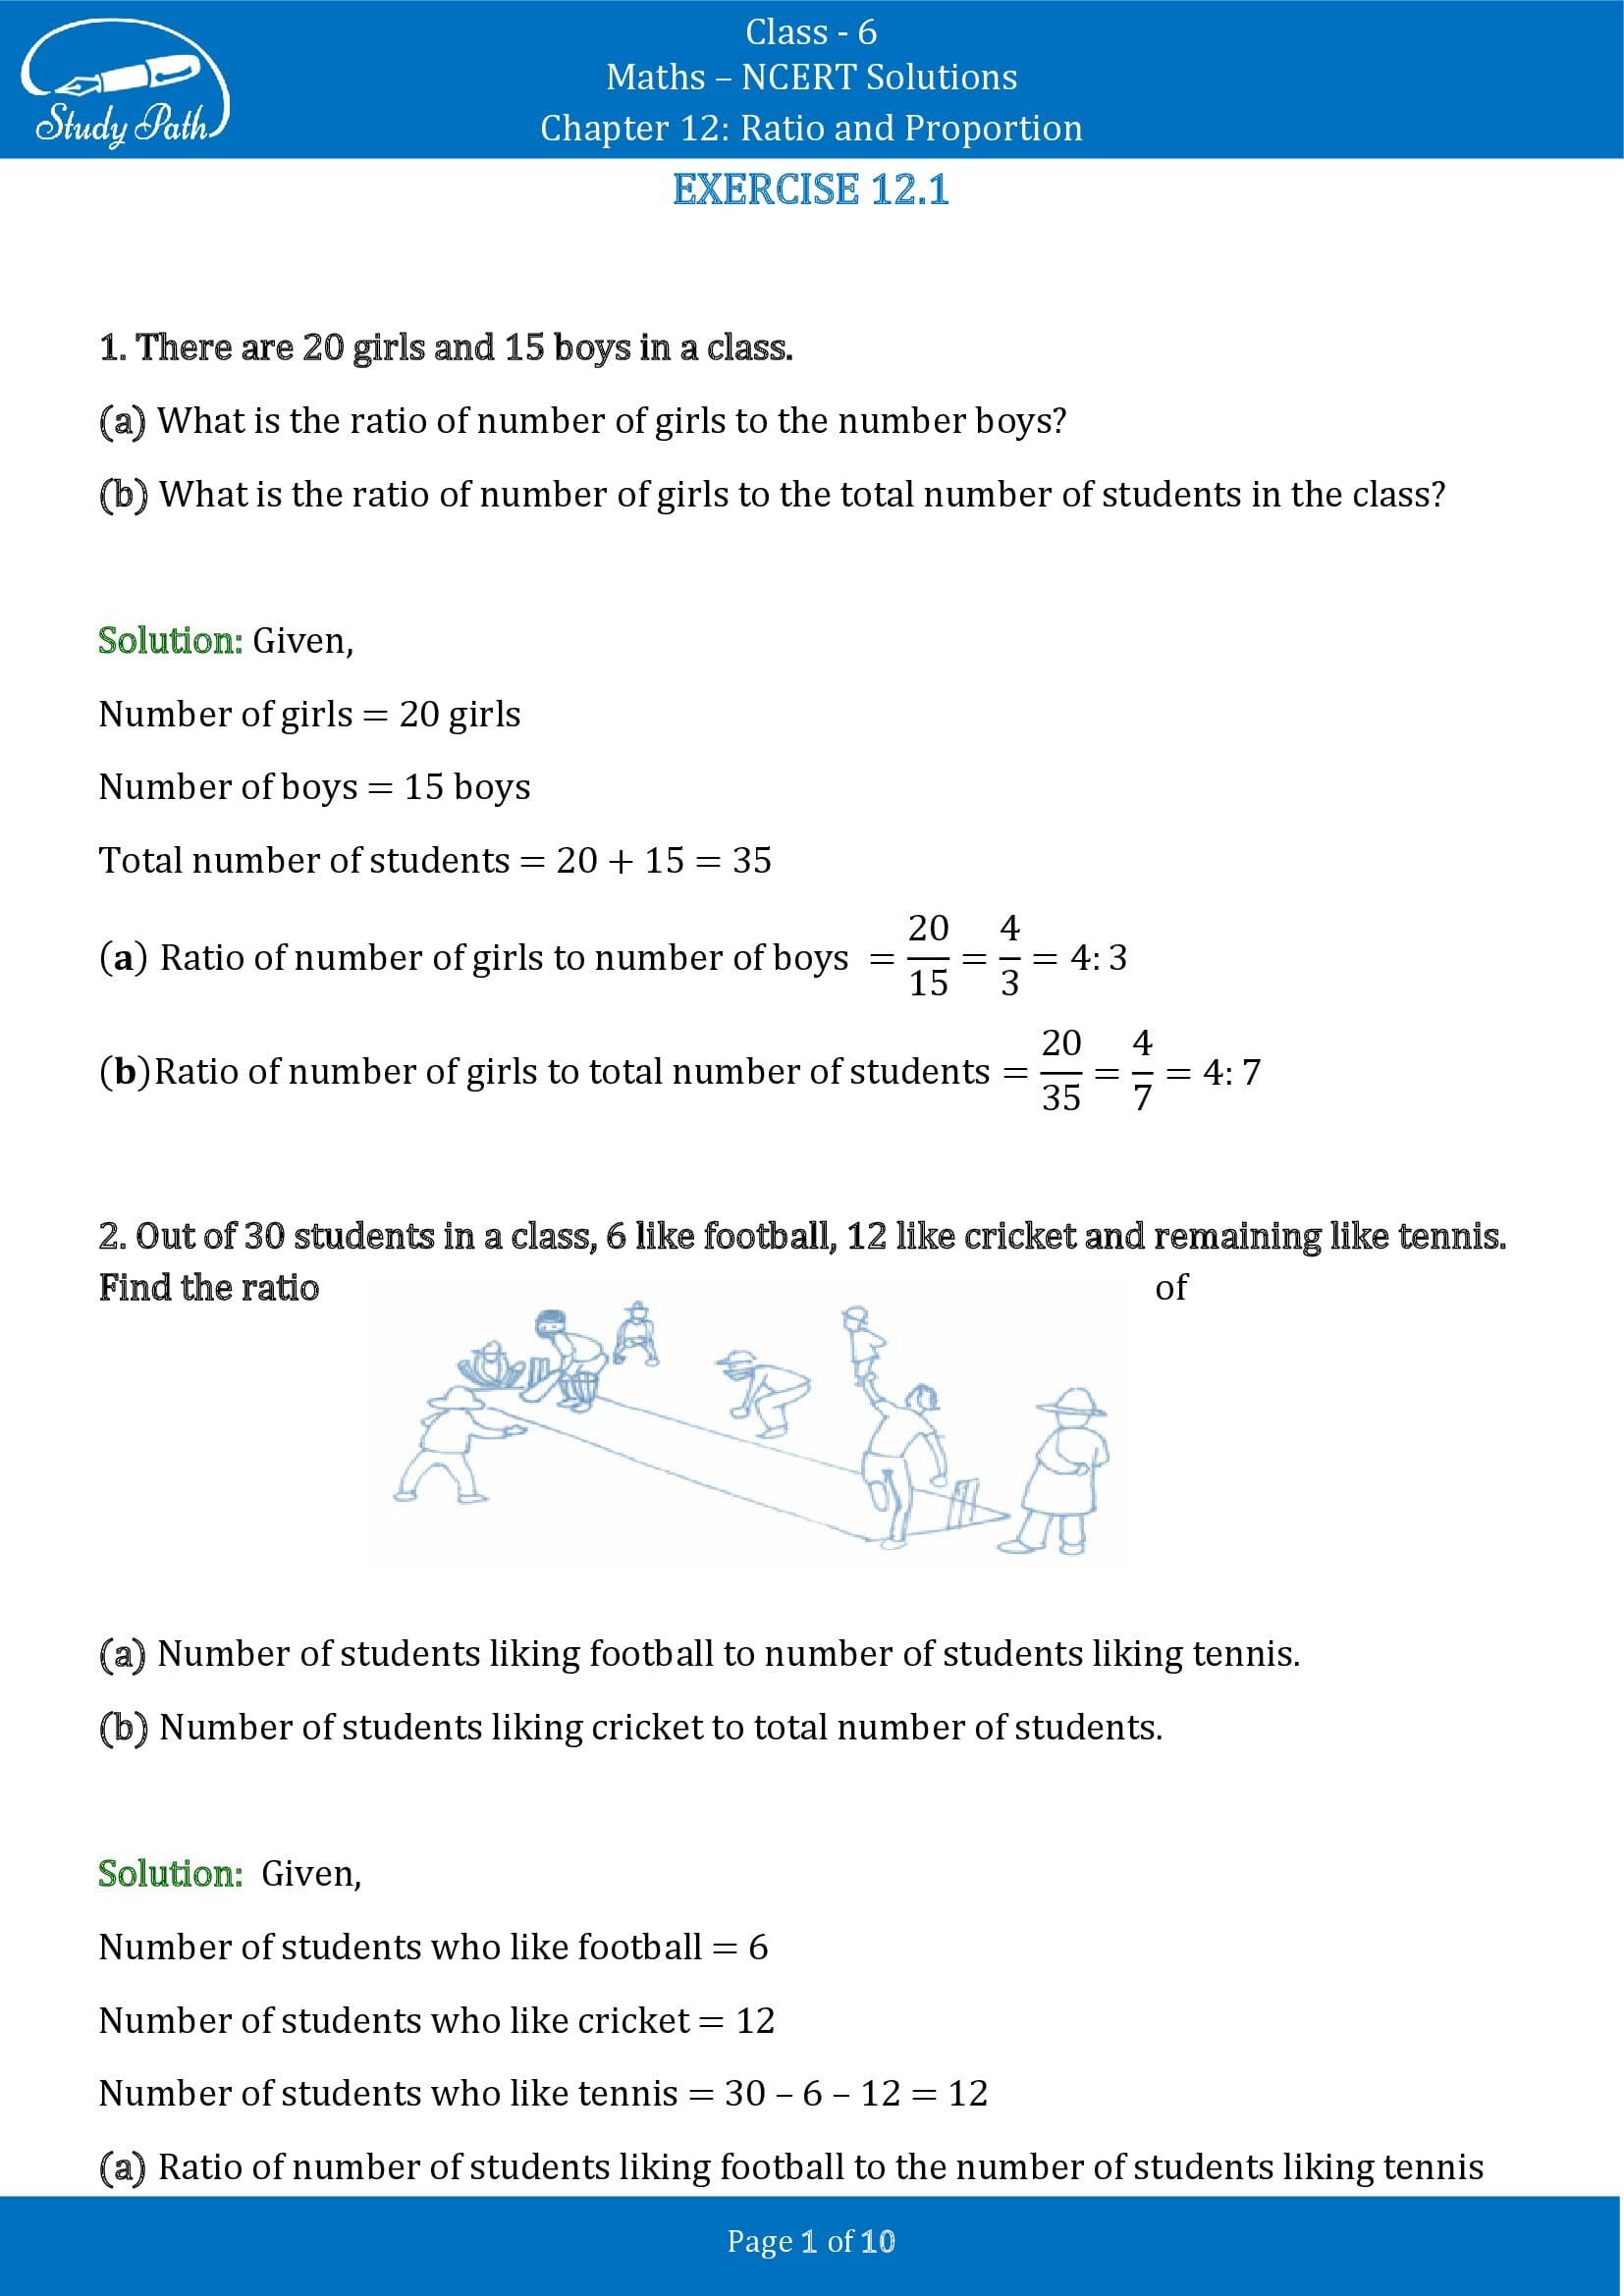 NCERT Solutions for Class 6 Maths Chapter 12 Ratio and Proportion Exercise 12.1 00001